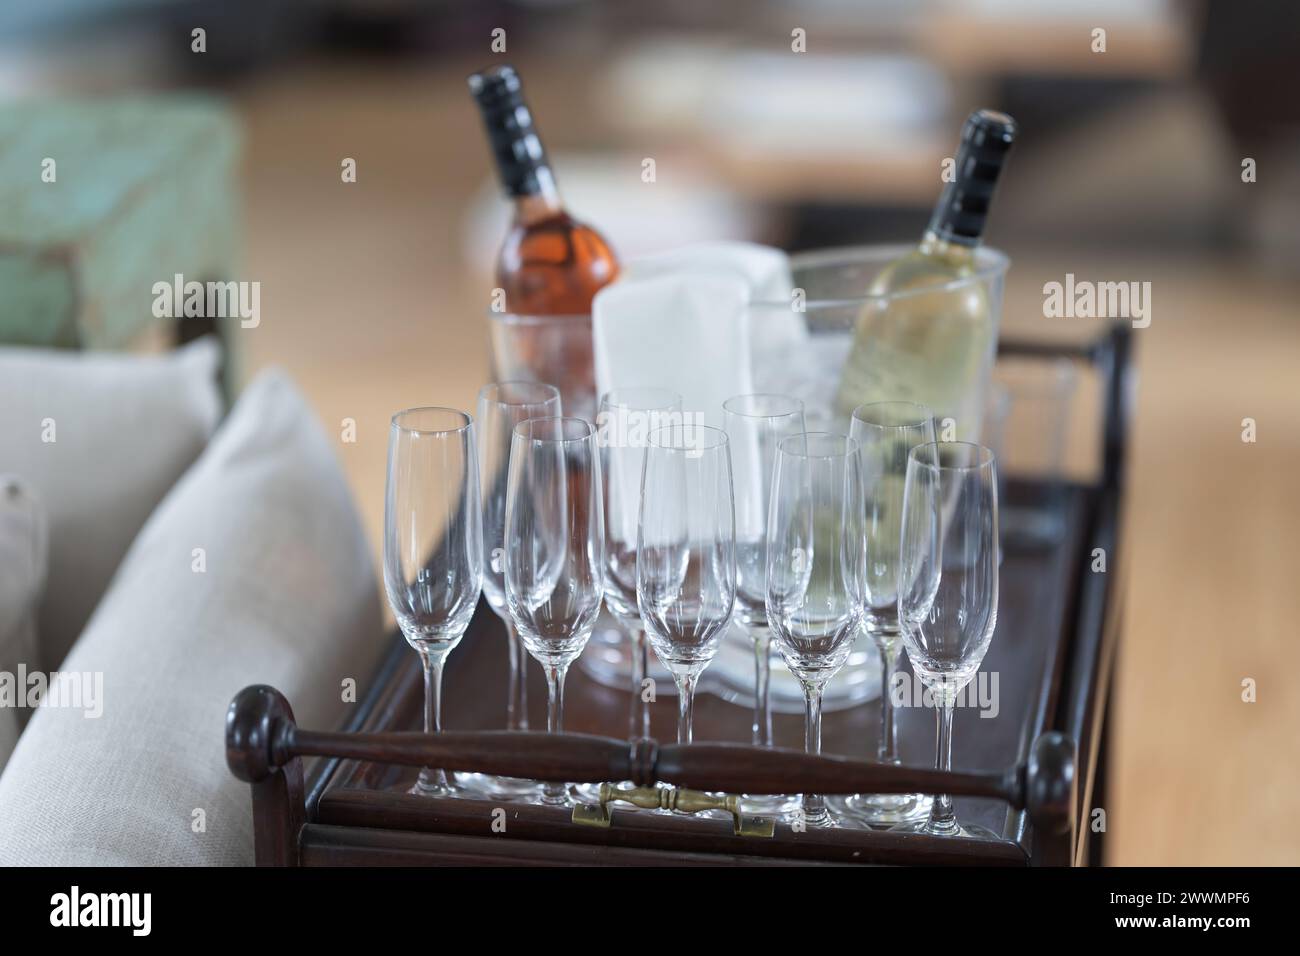 A tray of wine glasses and a bottle of wine. The tray is placed on a wooden surface Stock Photo